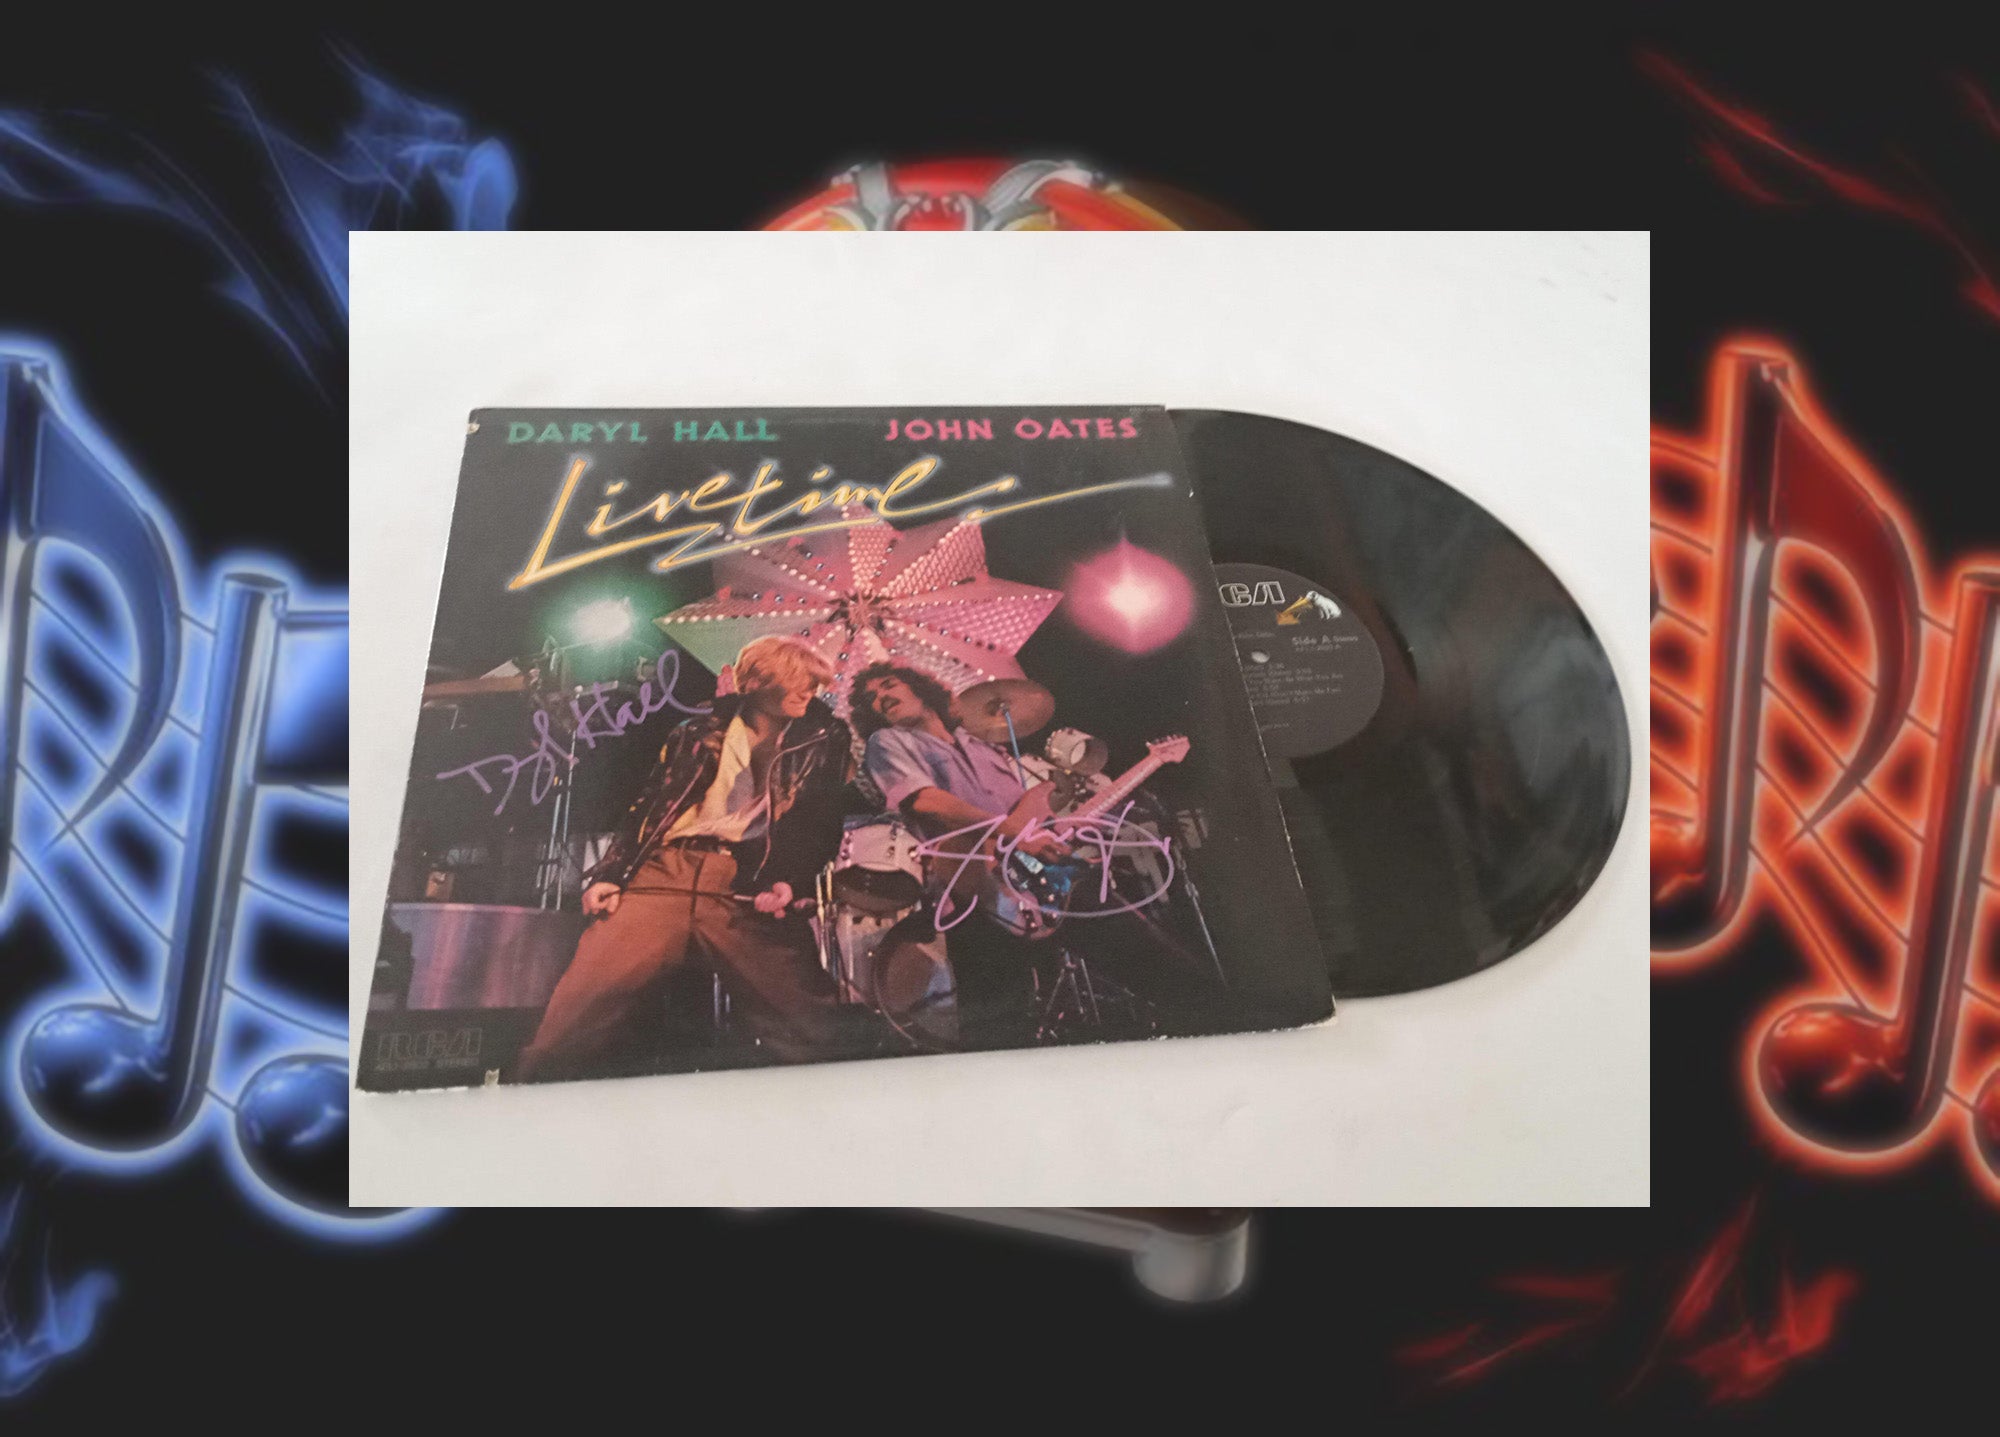 Daryl Hall and John Oates 'Live Time' LP signed with proof